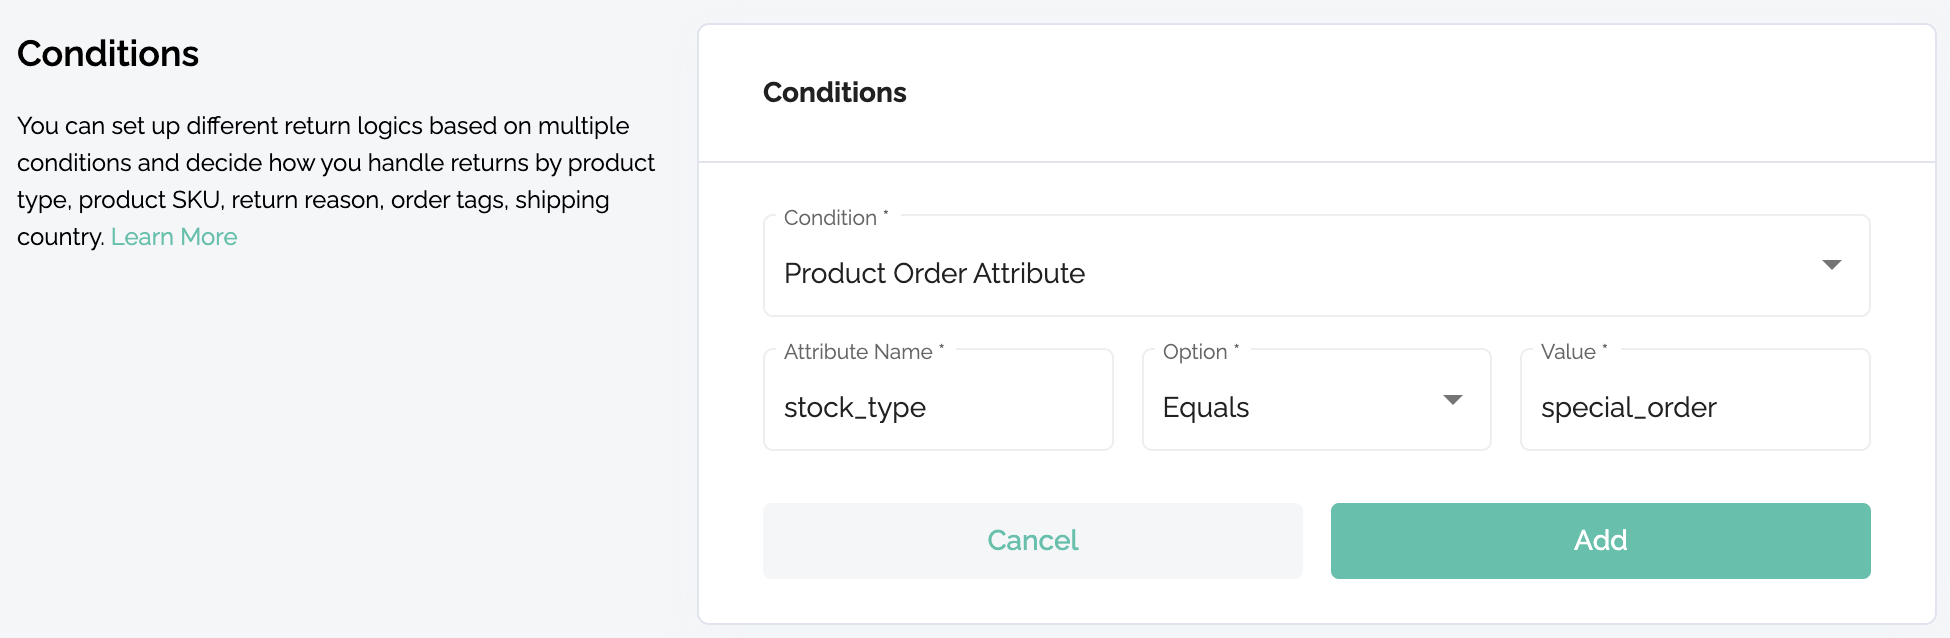 Allow exchanges for out of stock products